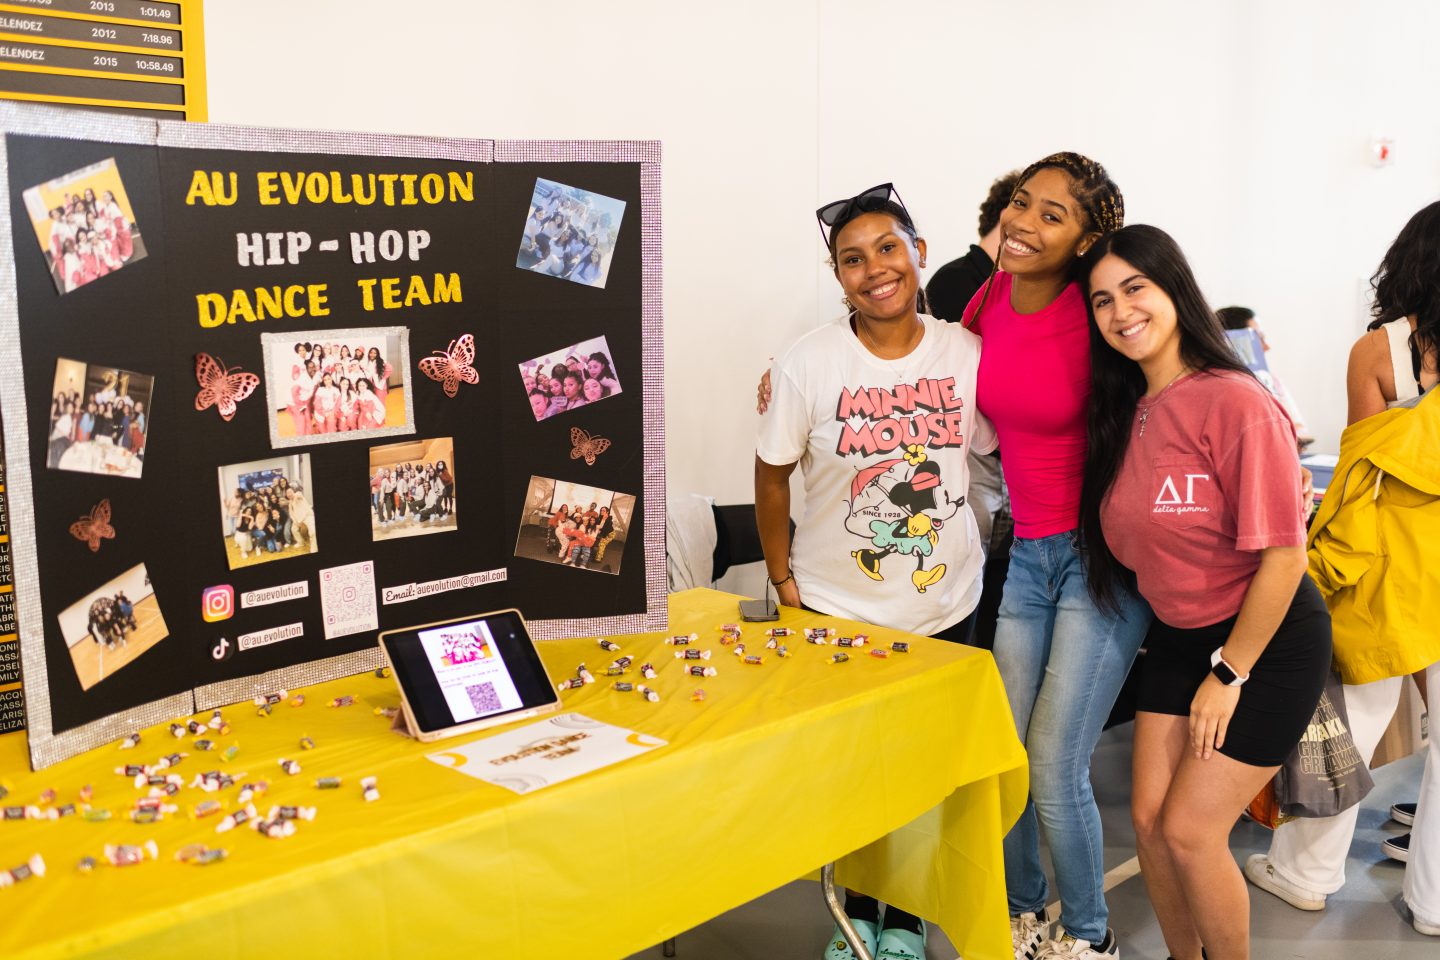 Three smiling people posing in front of a promotional display board for the "AU Evolution Hip-Hop Dance Team" with photos and decorations, beside a table with a tablet and candies. Text Transcription: The text on the display board reads: "AU Evolution Hip-Hop Dance Team," along with the Instagram handle "@auevolution," an email address, and the hashtag "#auevolution."